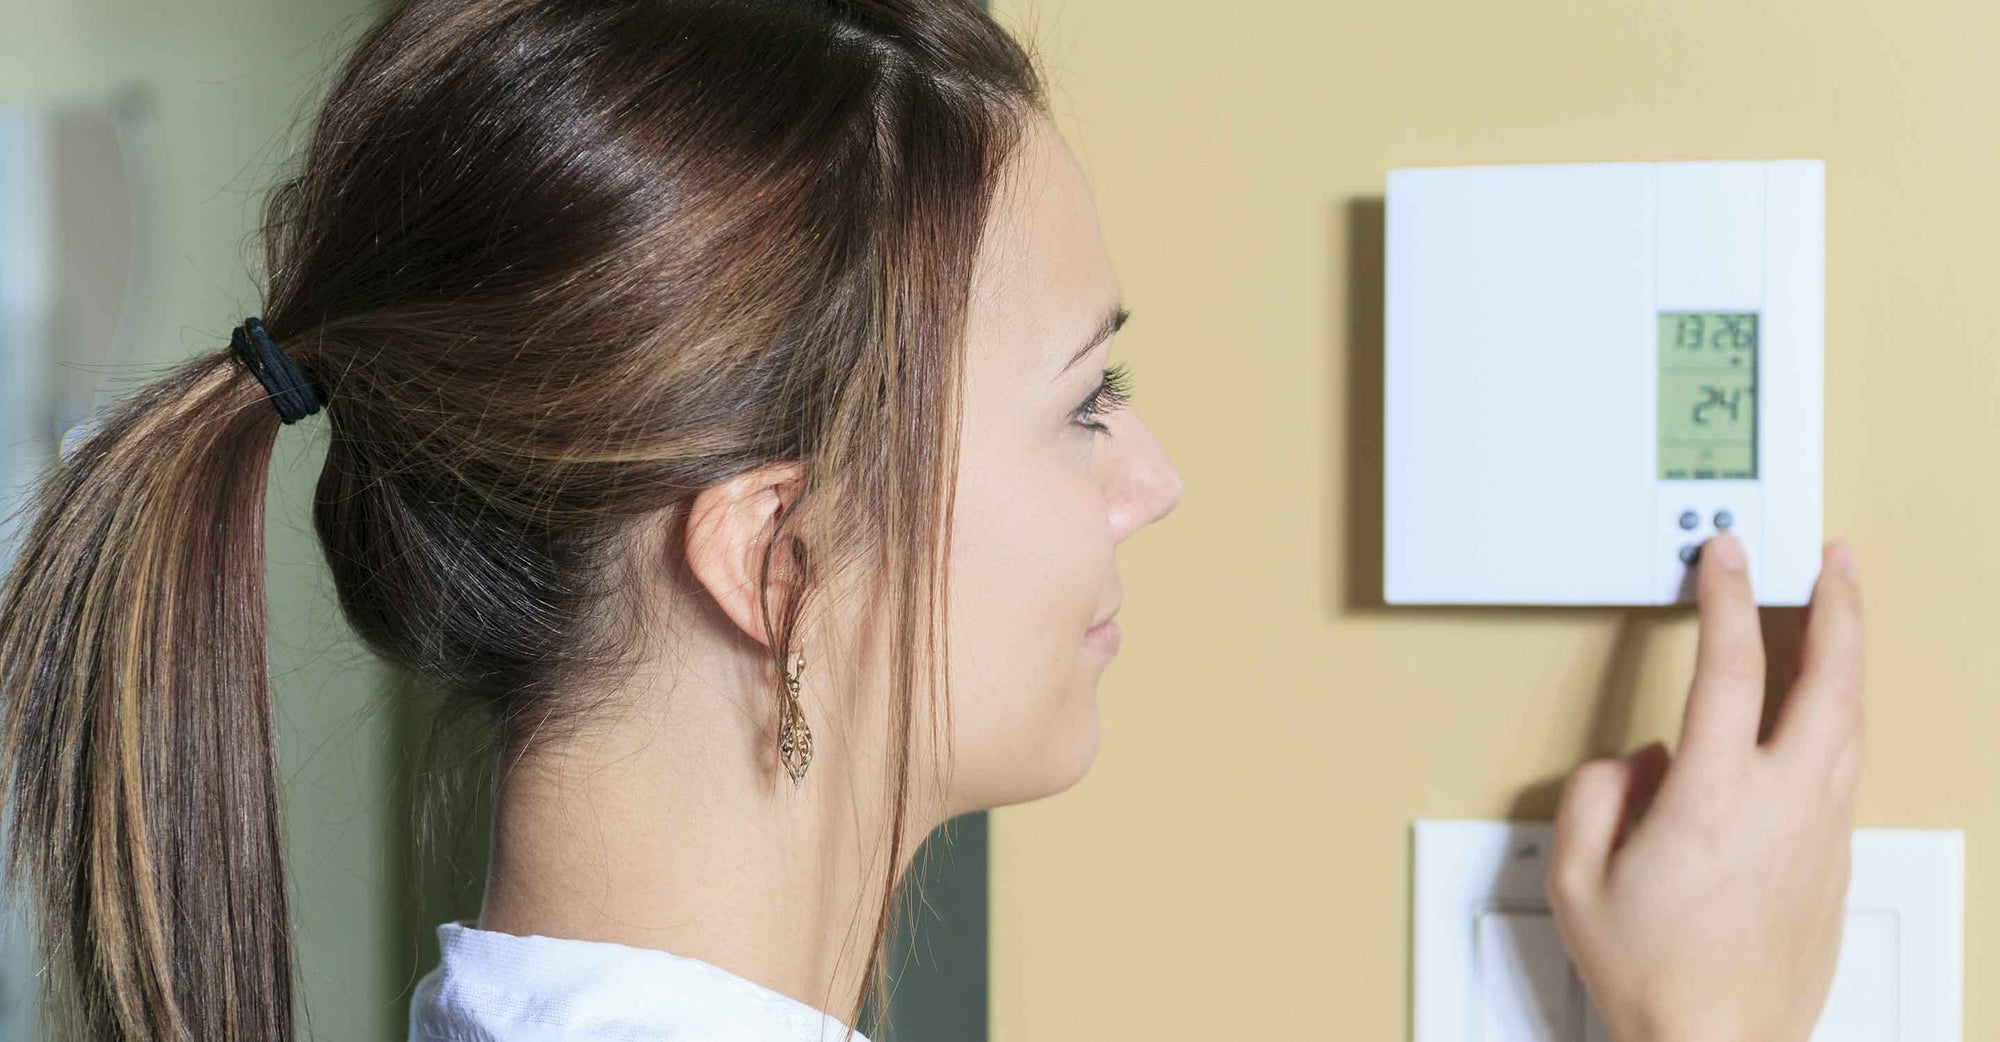 Young woman adjusting home thermostat